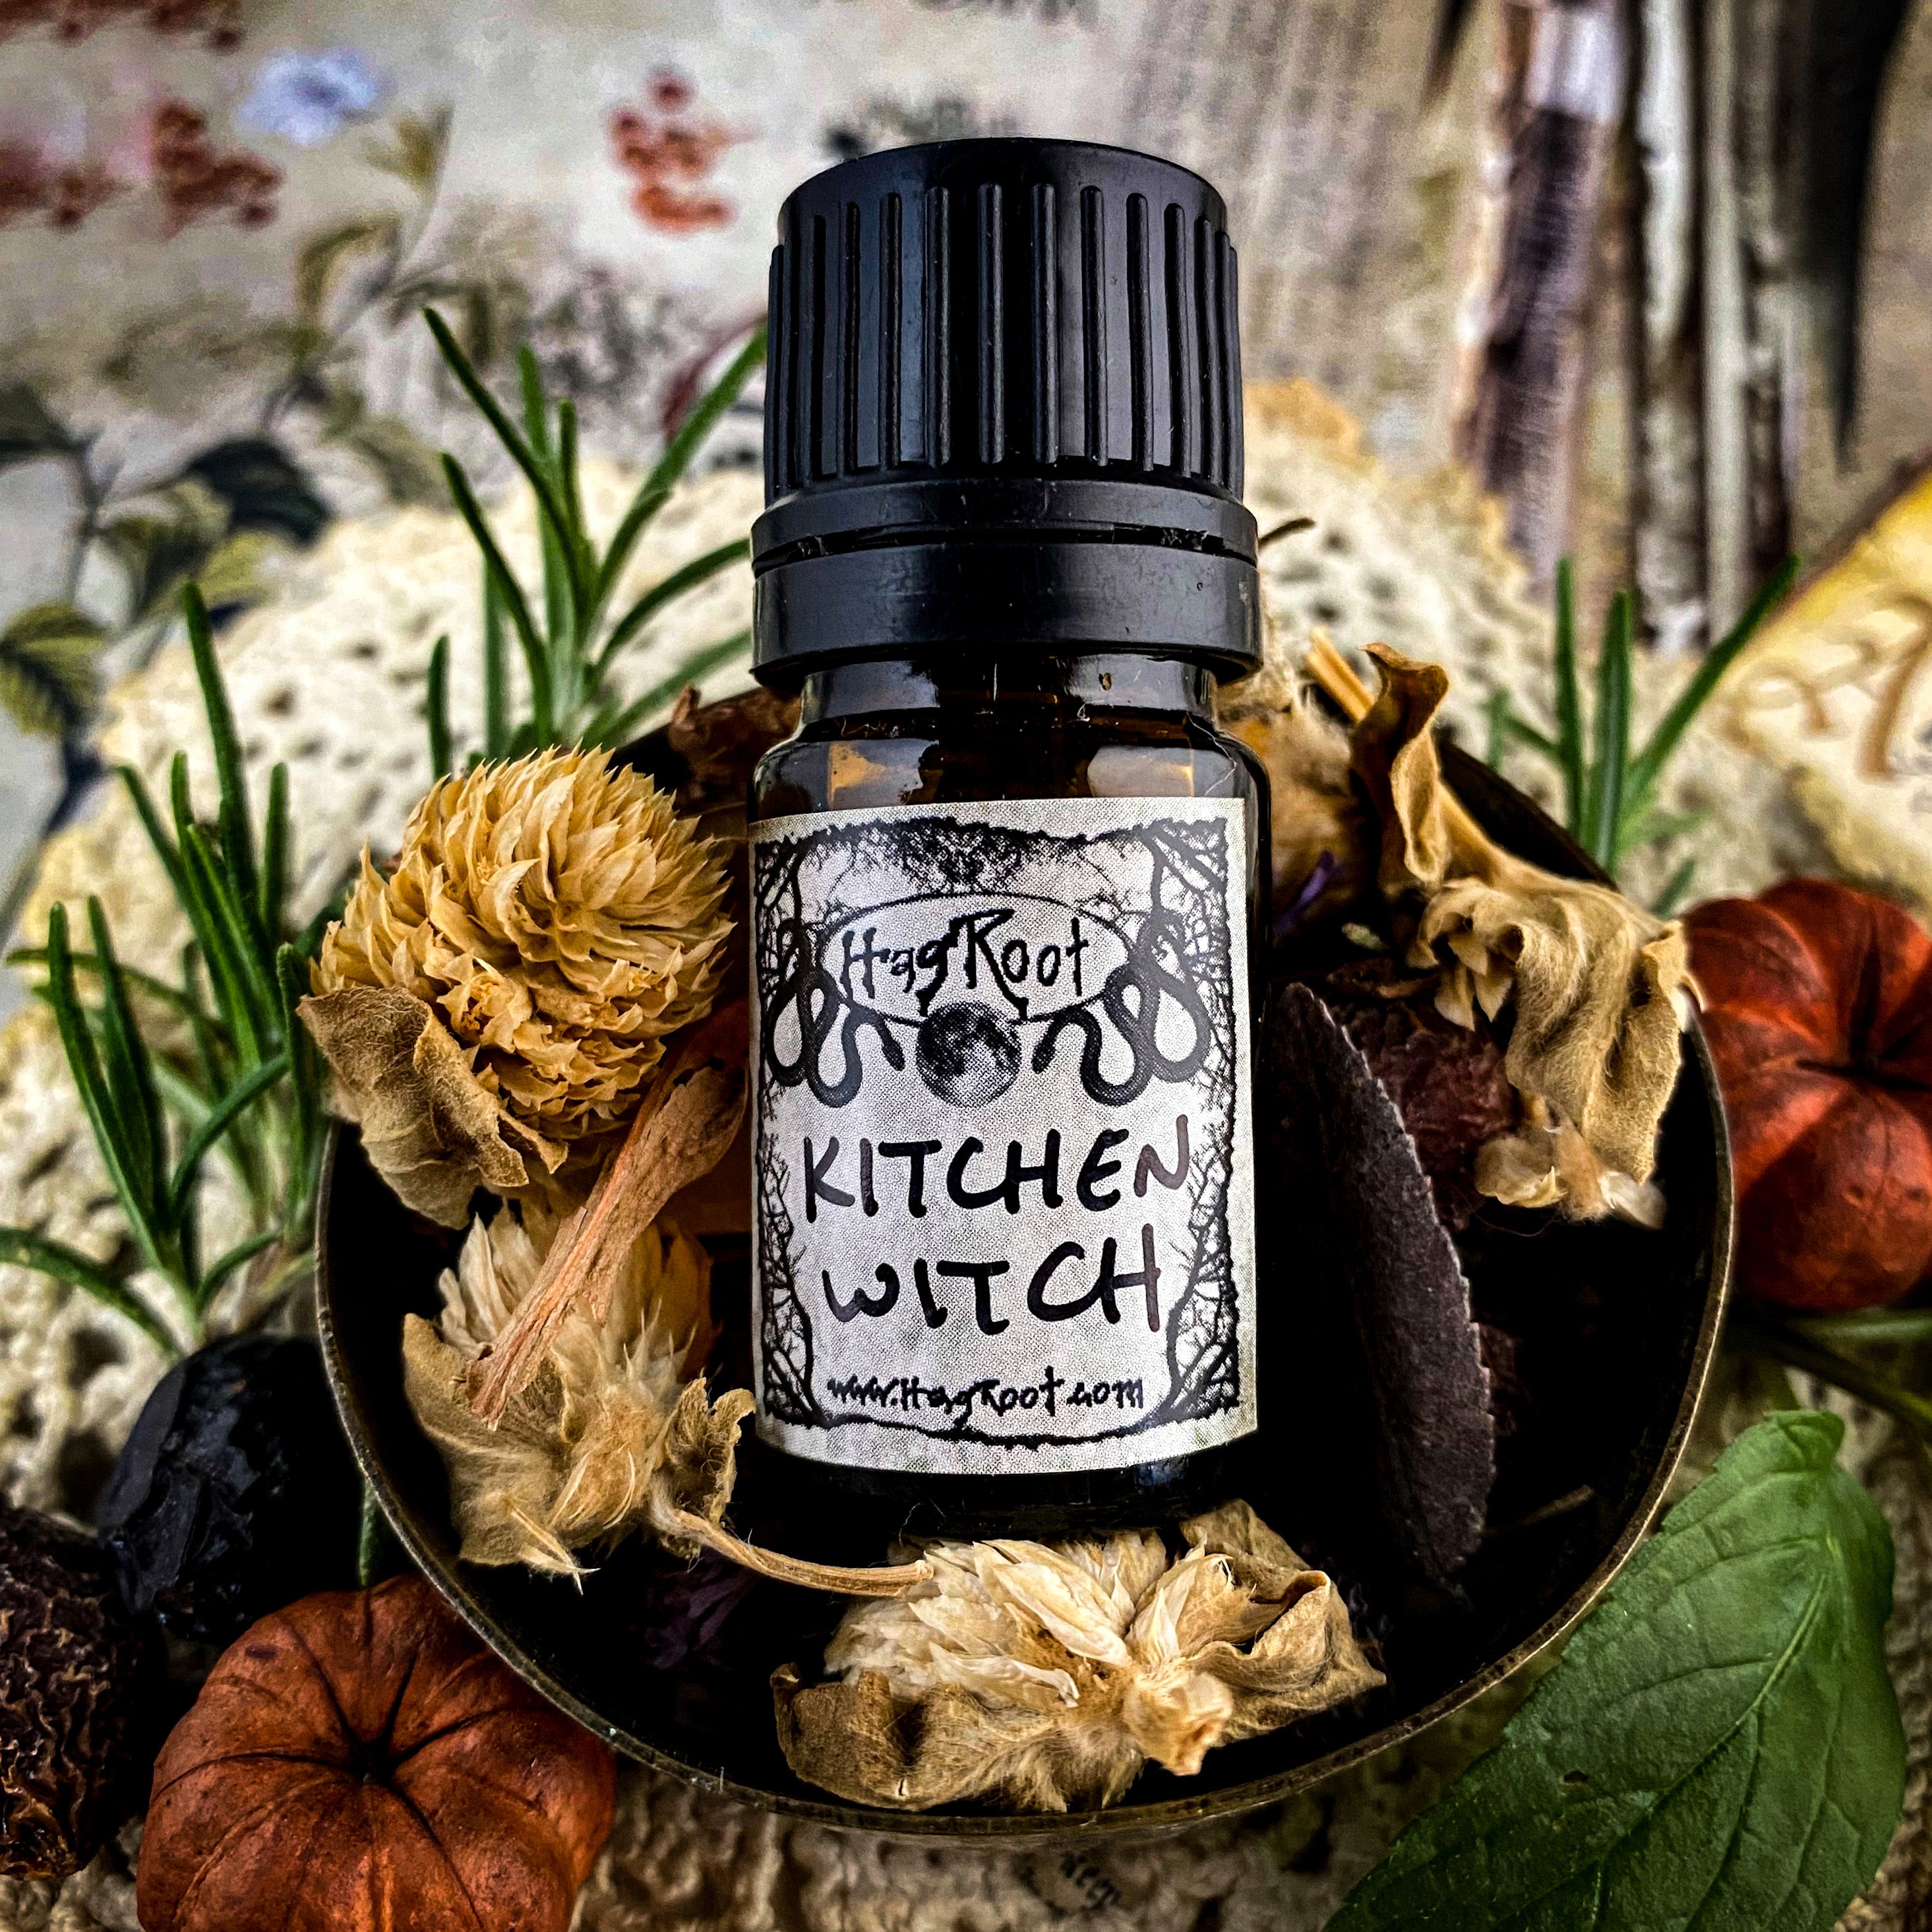 KITCHEN WITCH-(Freshly Picked Herbs and Wood Stove Baked Cinnamon Bread)-Perfume, Cologne, Anointing, Ritual Oil